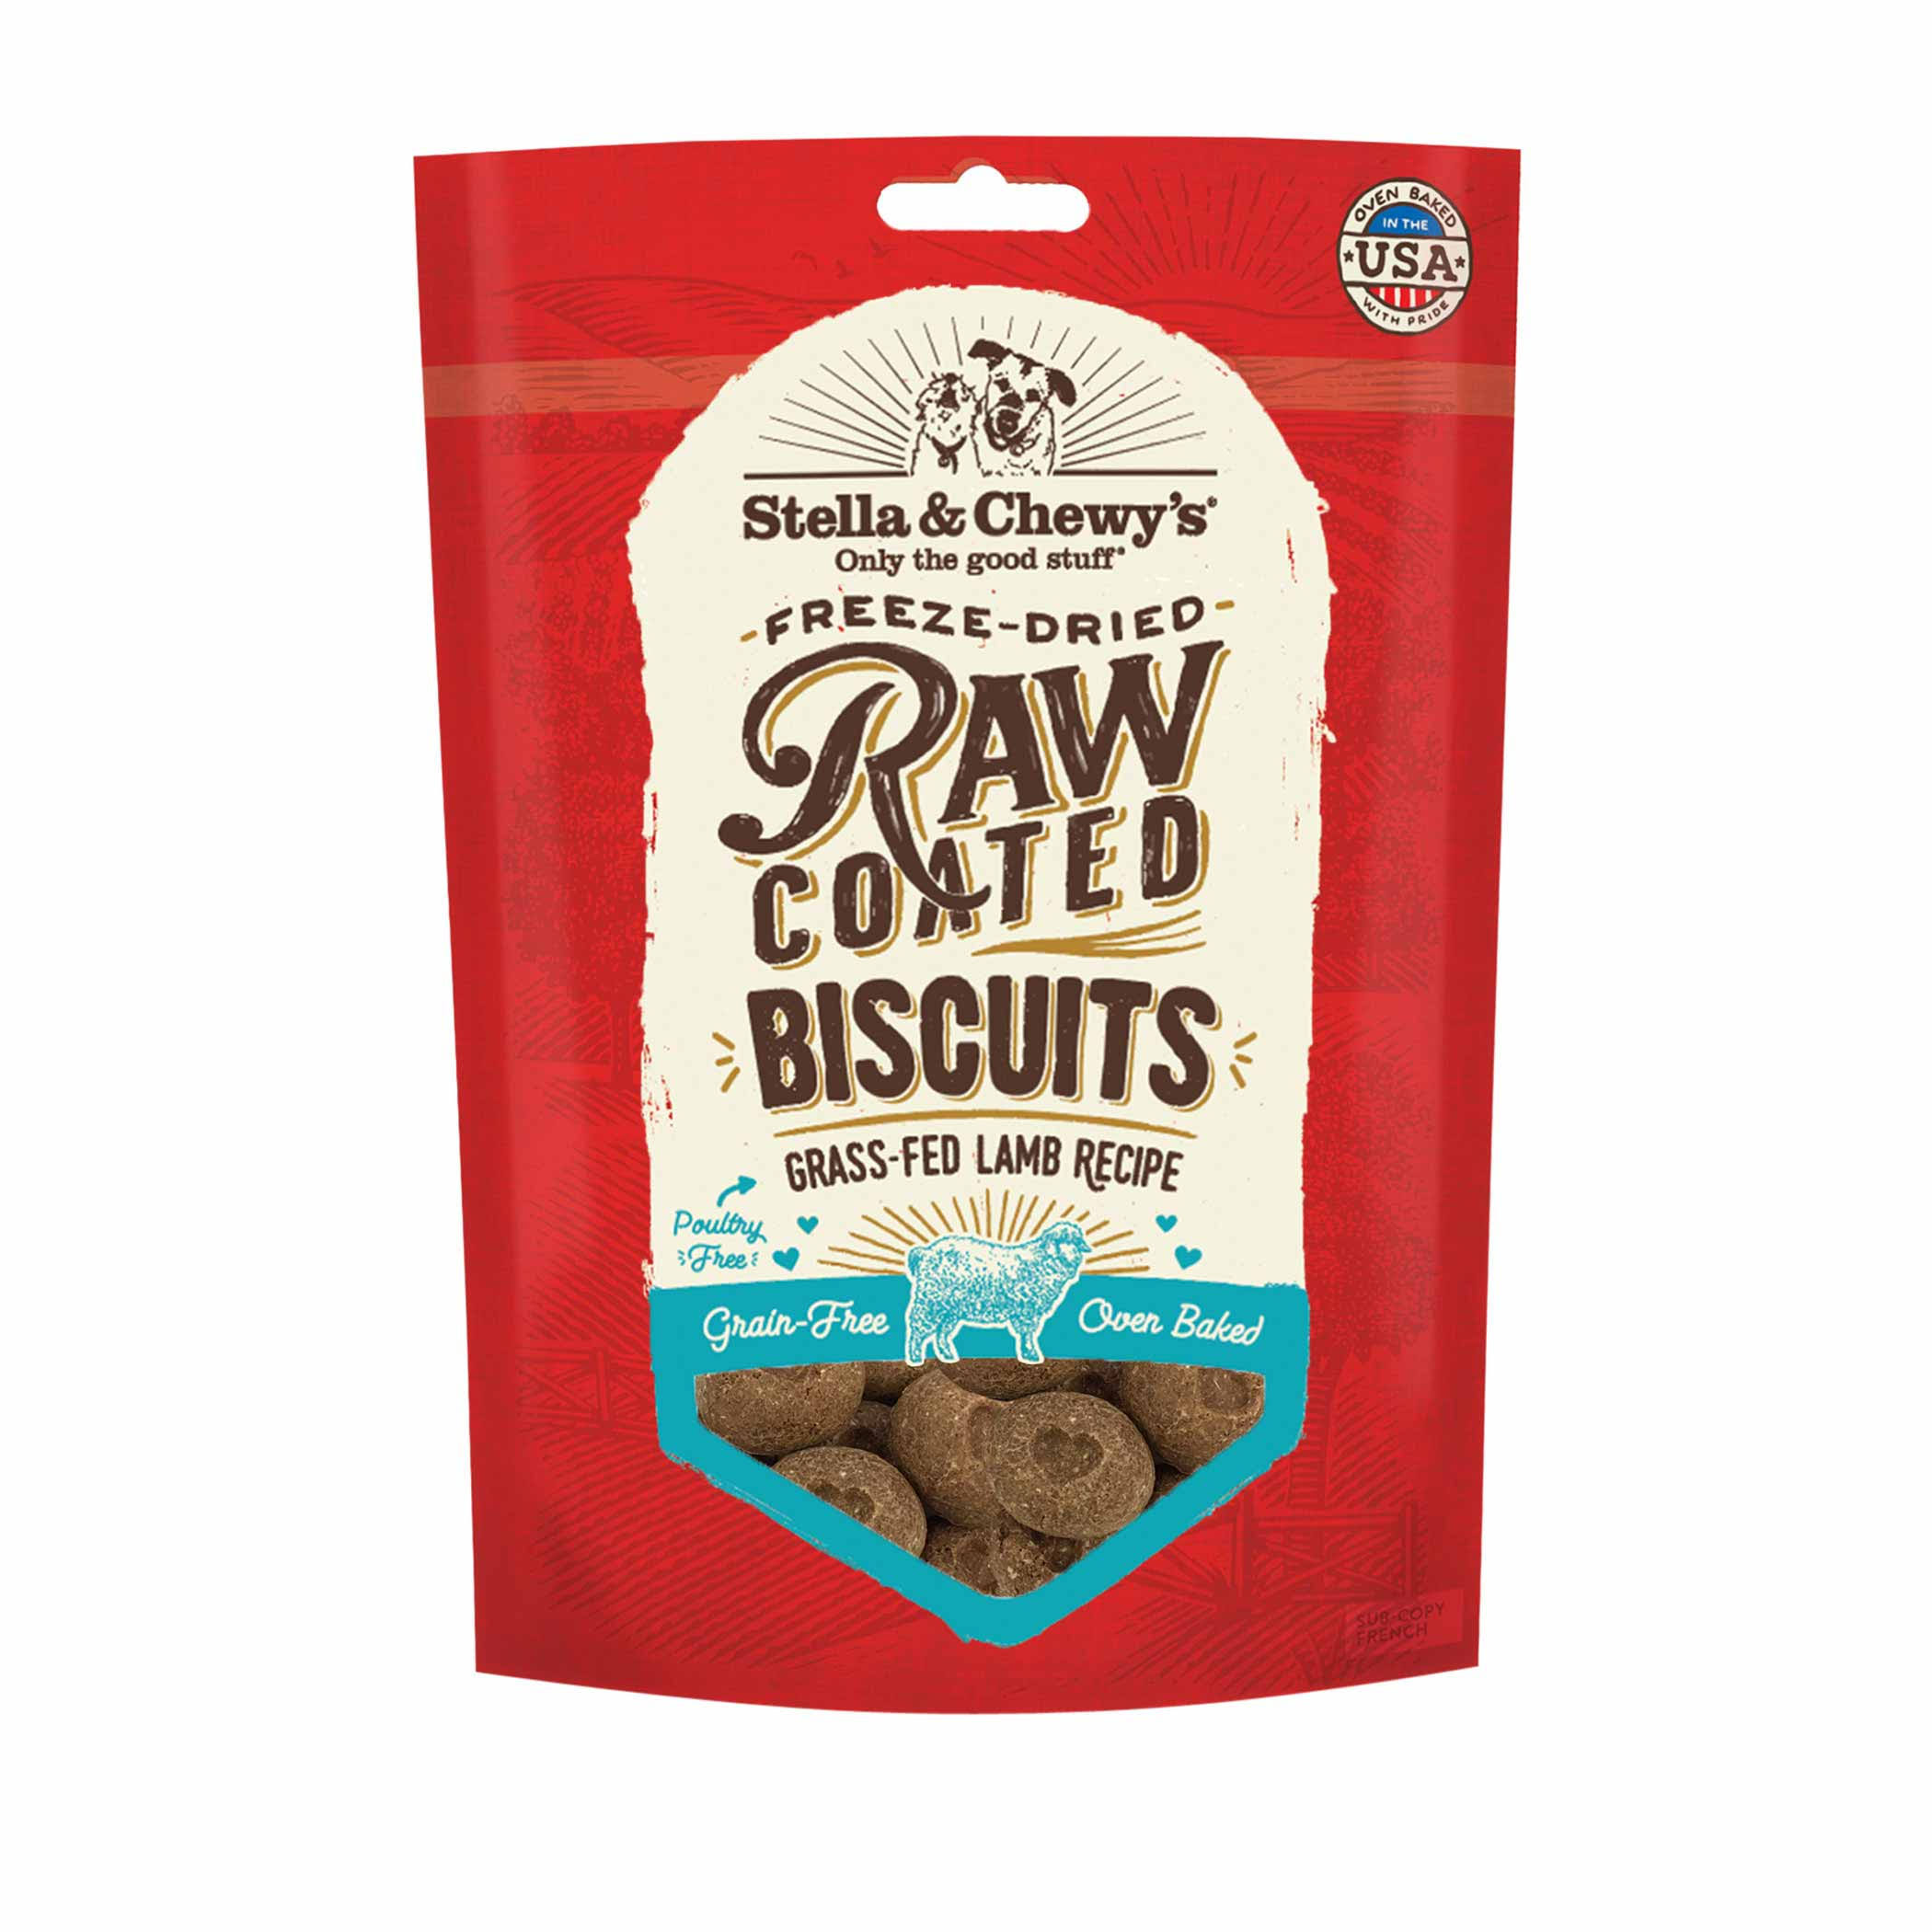 Stella & Chewys Freeze-Dried Raw Coated Dog Biscuits Grass-Fed Lamb Recipe Protein Rich, Grain Free Dog & Puppy Treat Great Snack for Training & RE